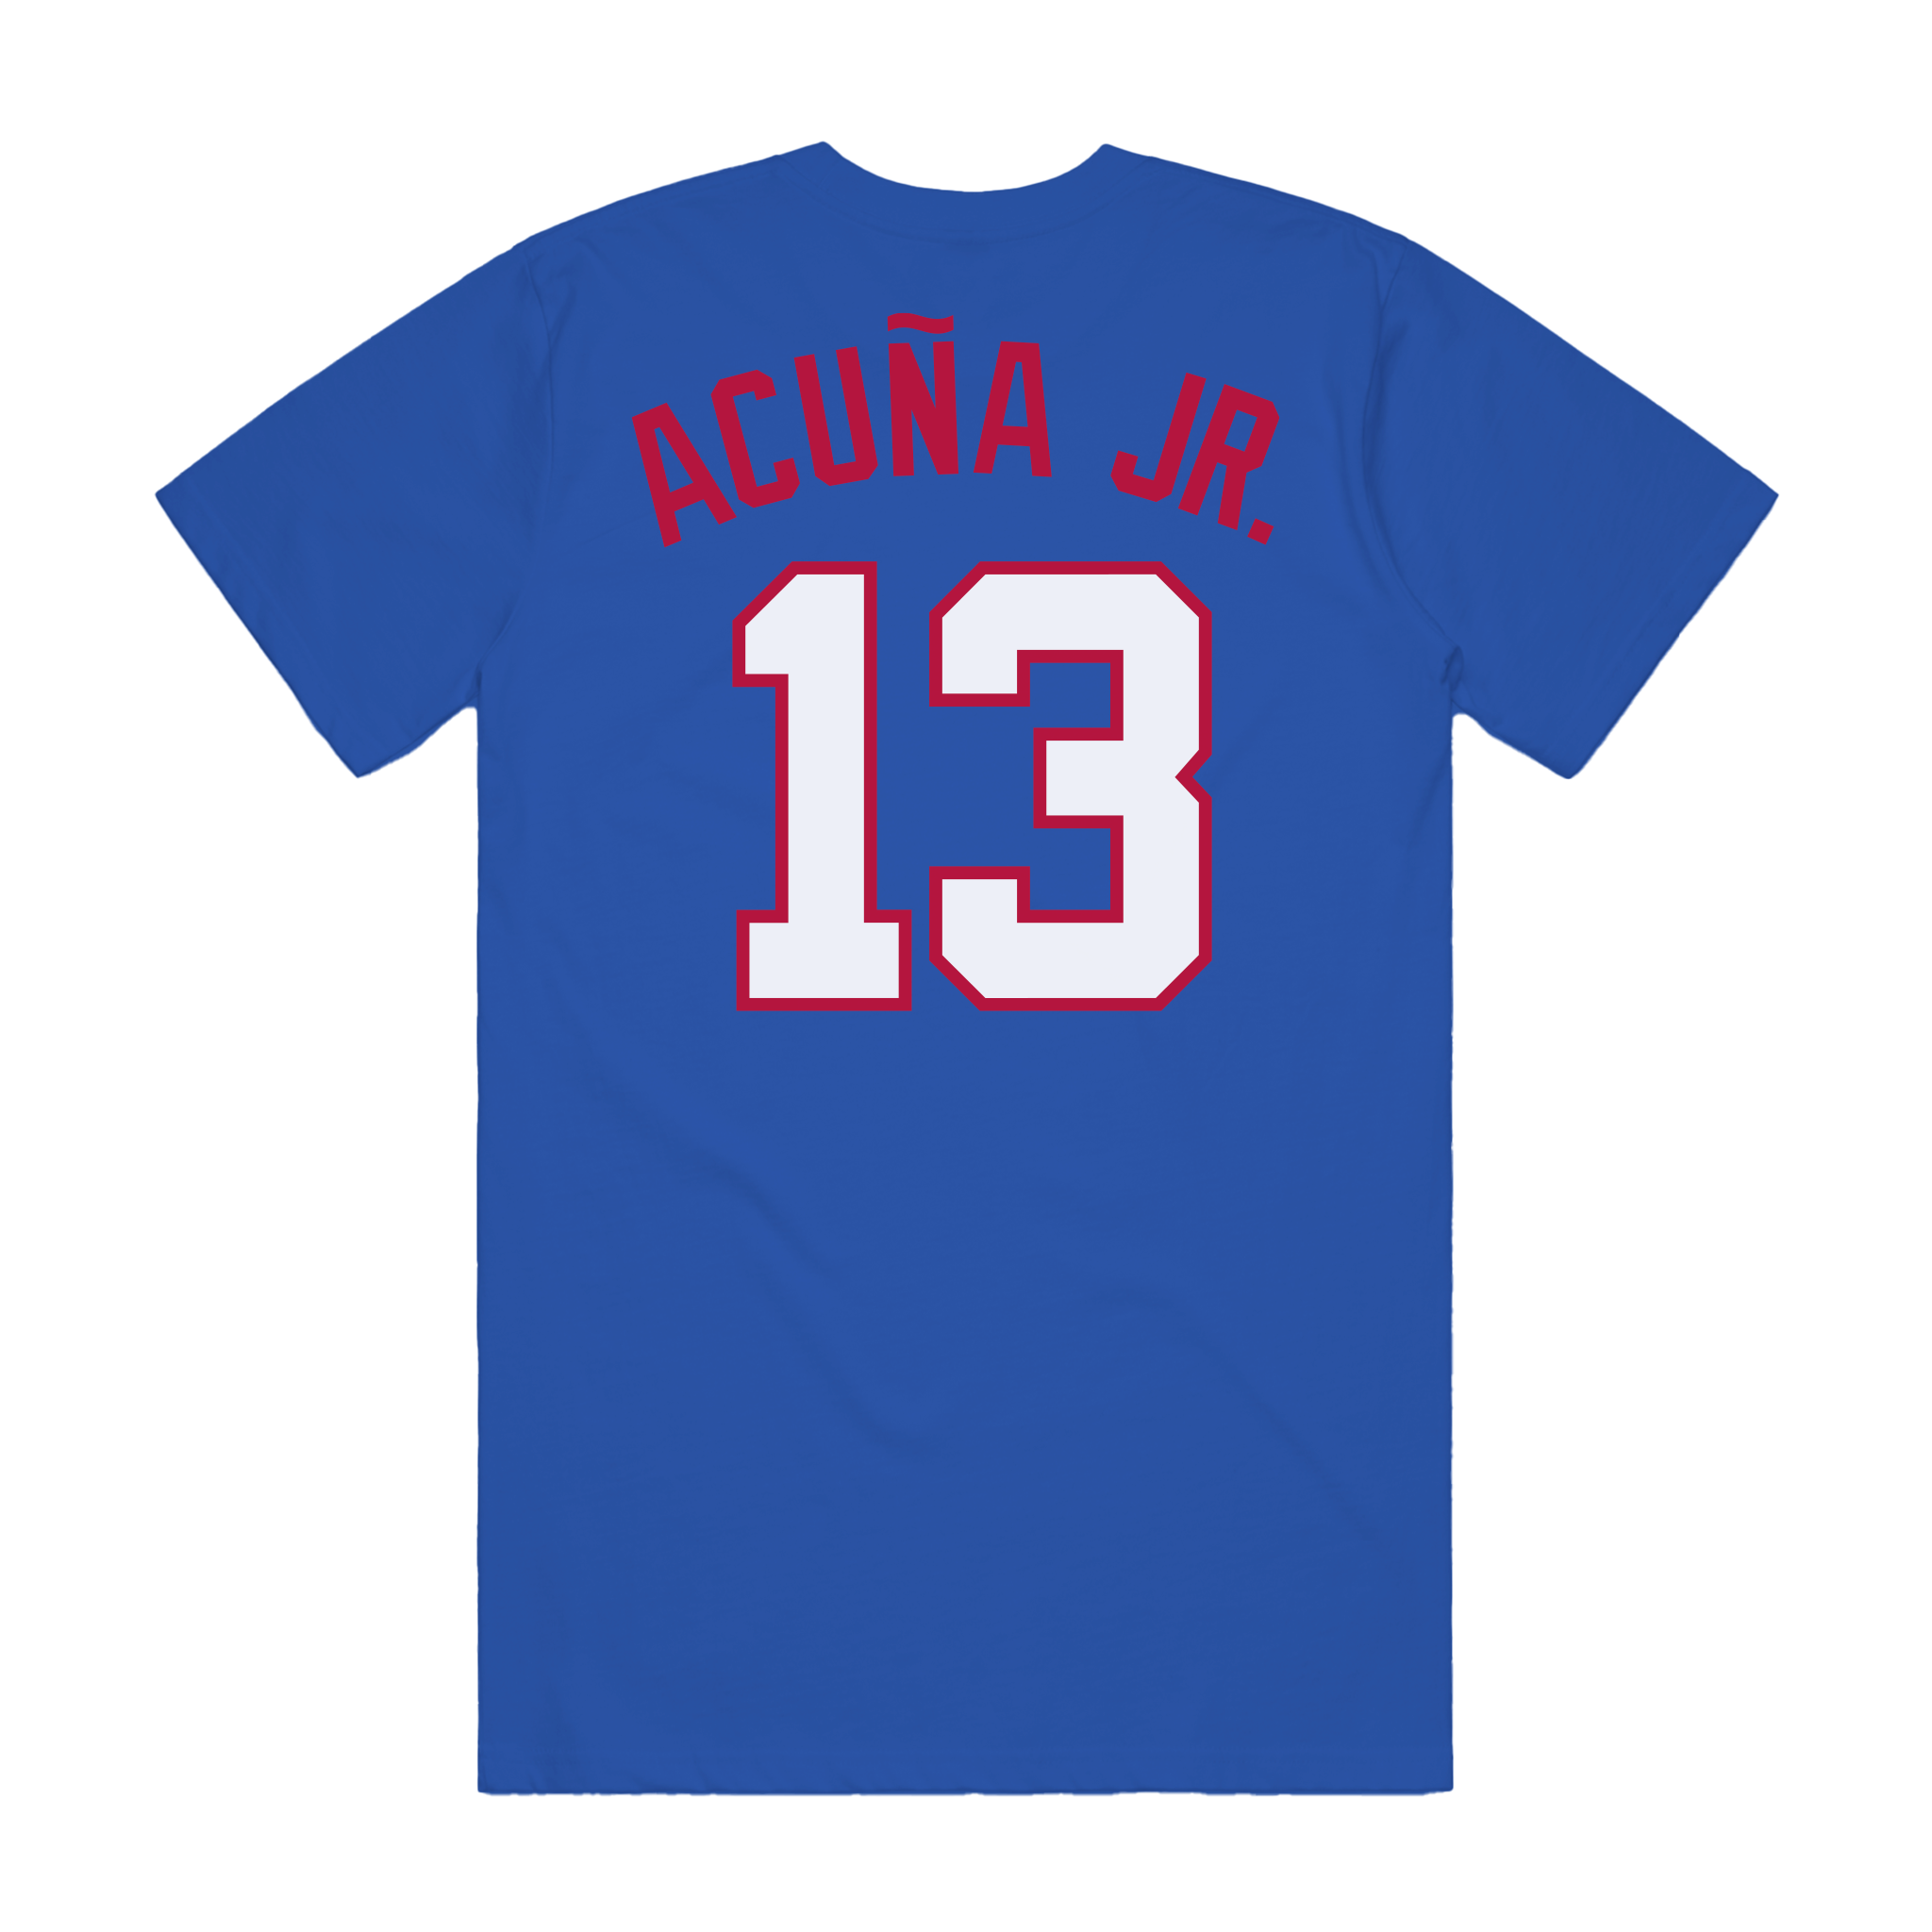 Back image of the Blue Crew Neck Tee Shirt with Short Sleeves Featuring "Acuña Jr. 13" printed in red and white